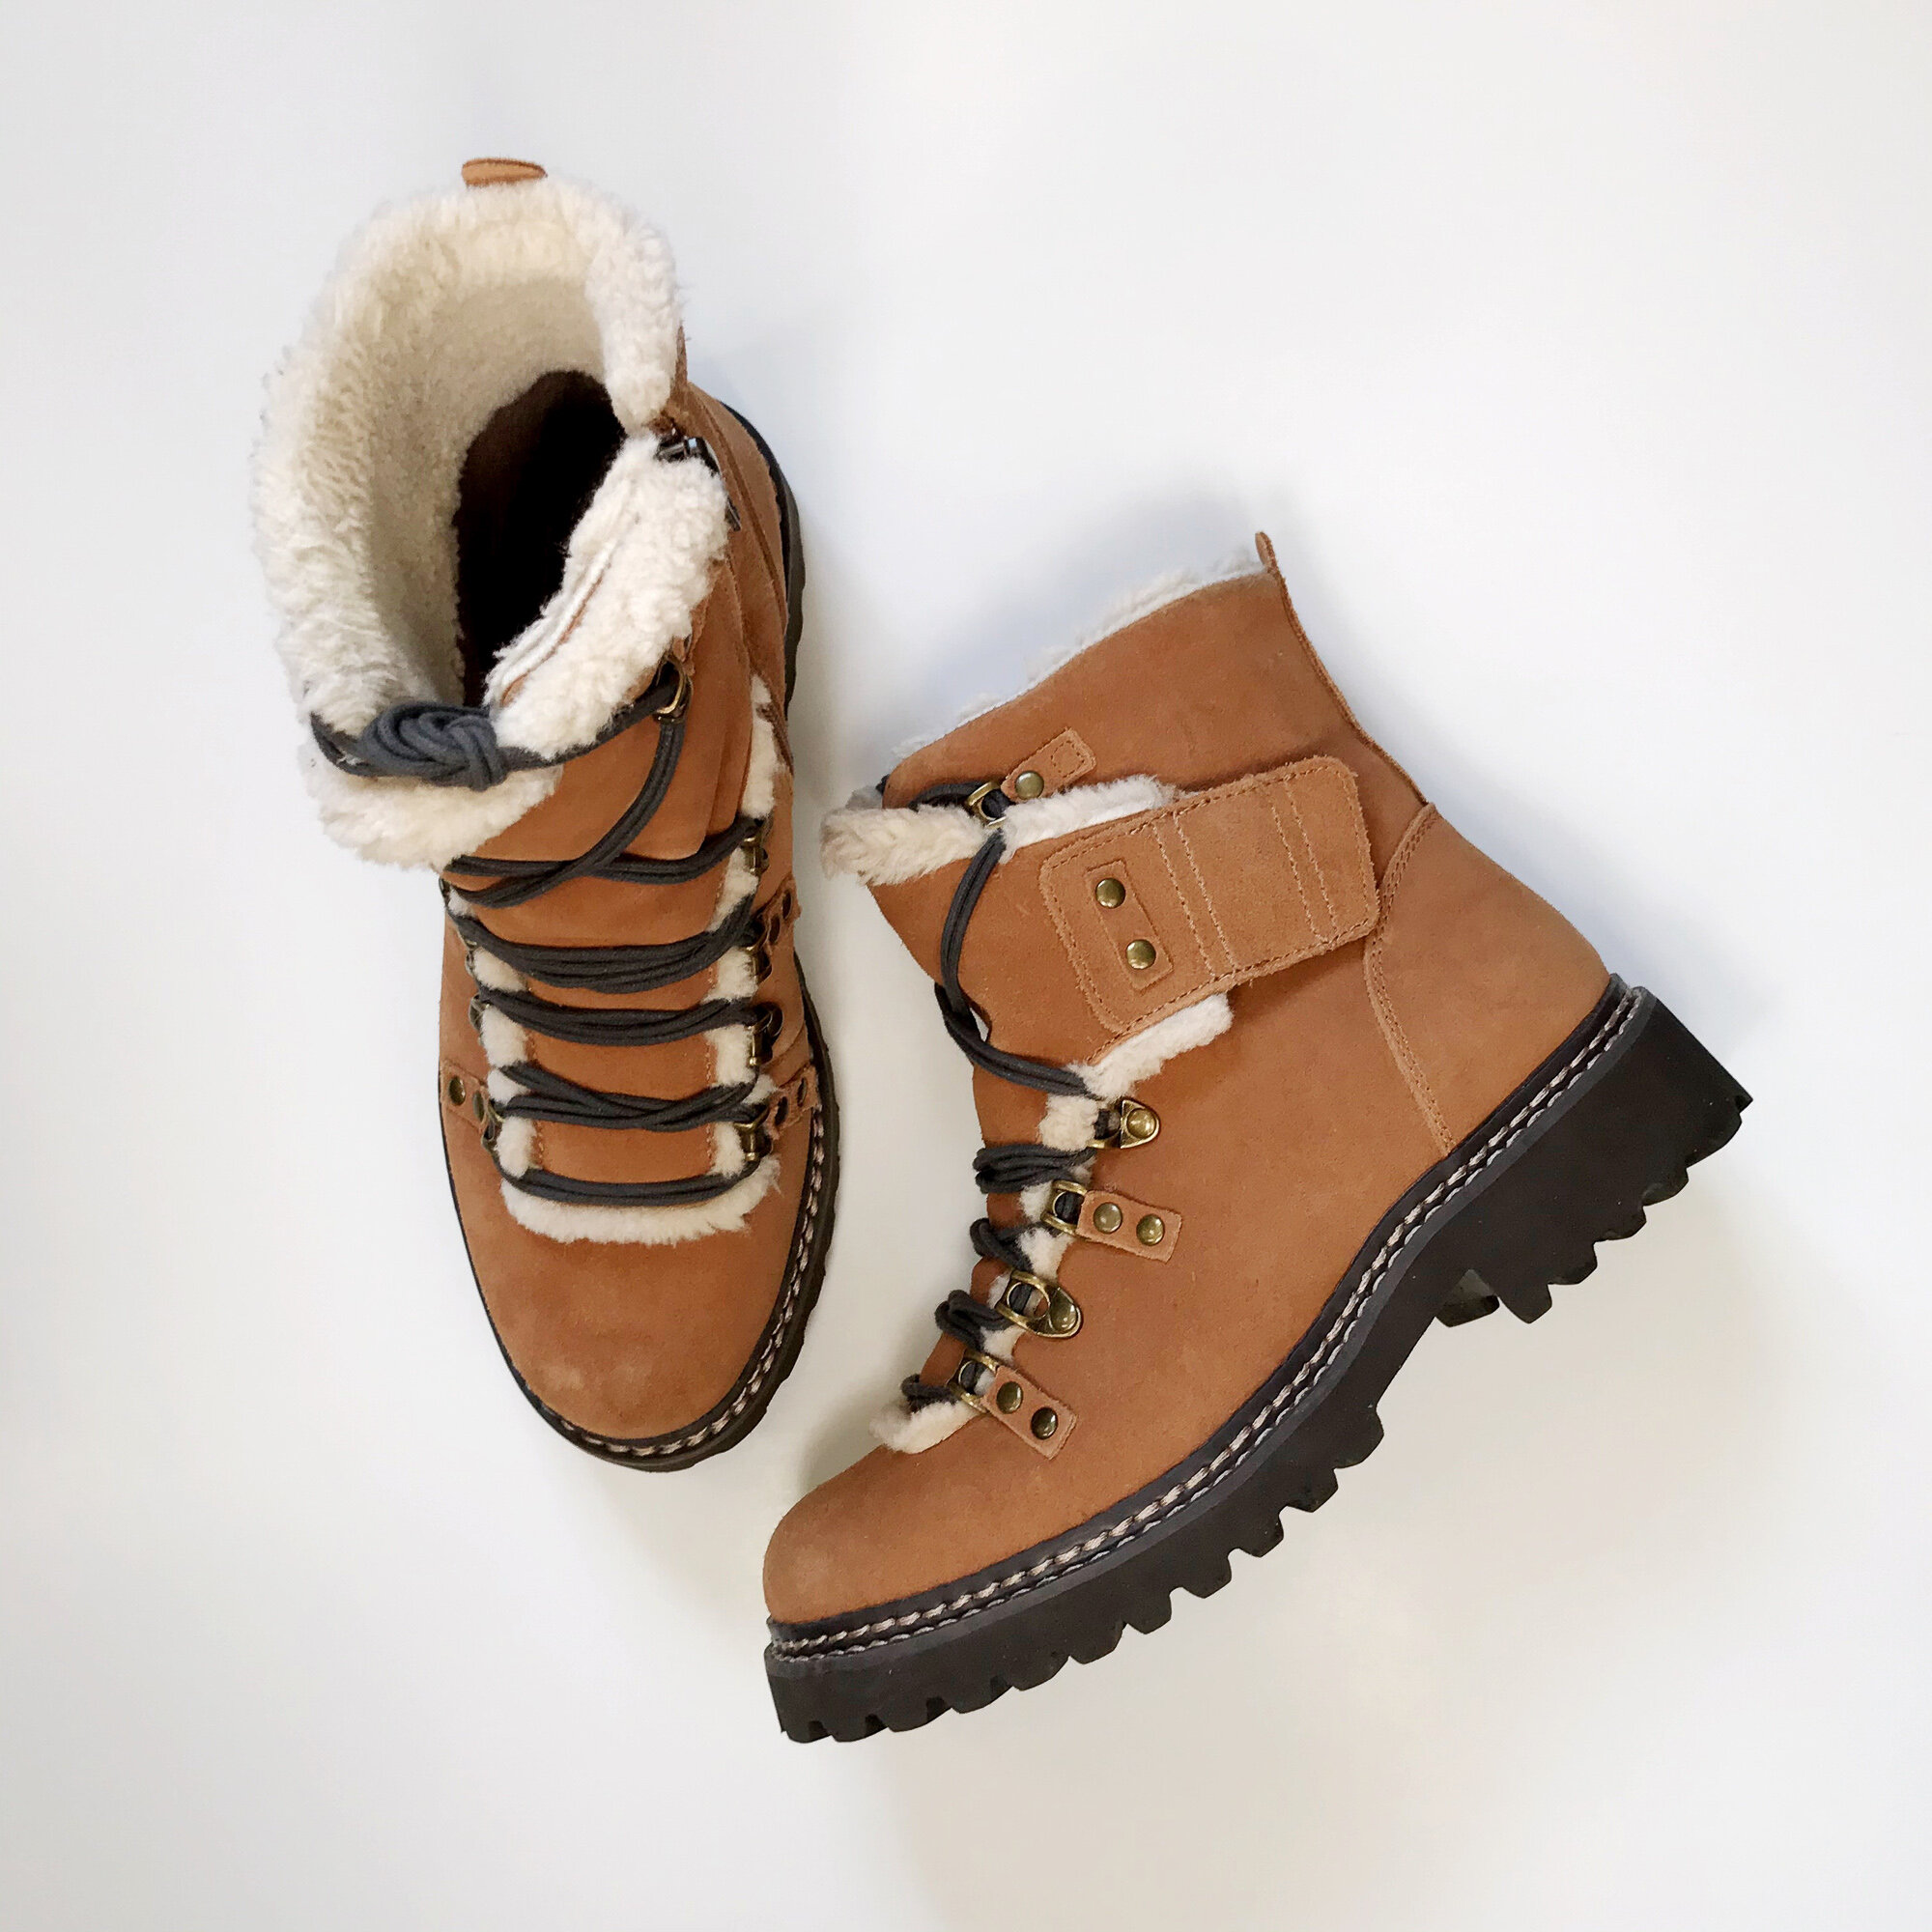 Earth Glacier waterproof boot review and outfit ideas — Cotton Cashmere Cat Hair